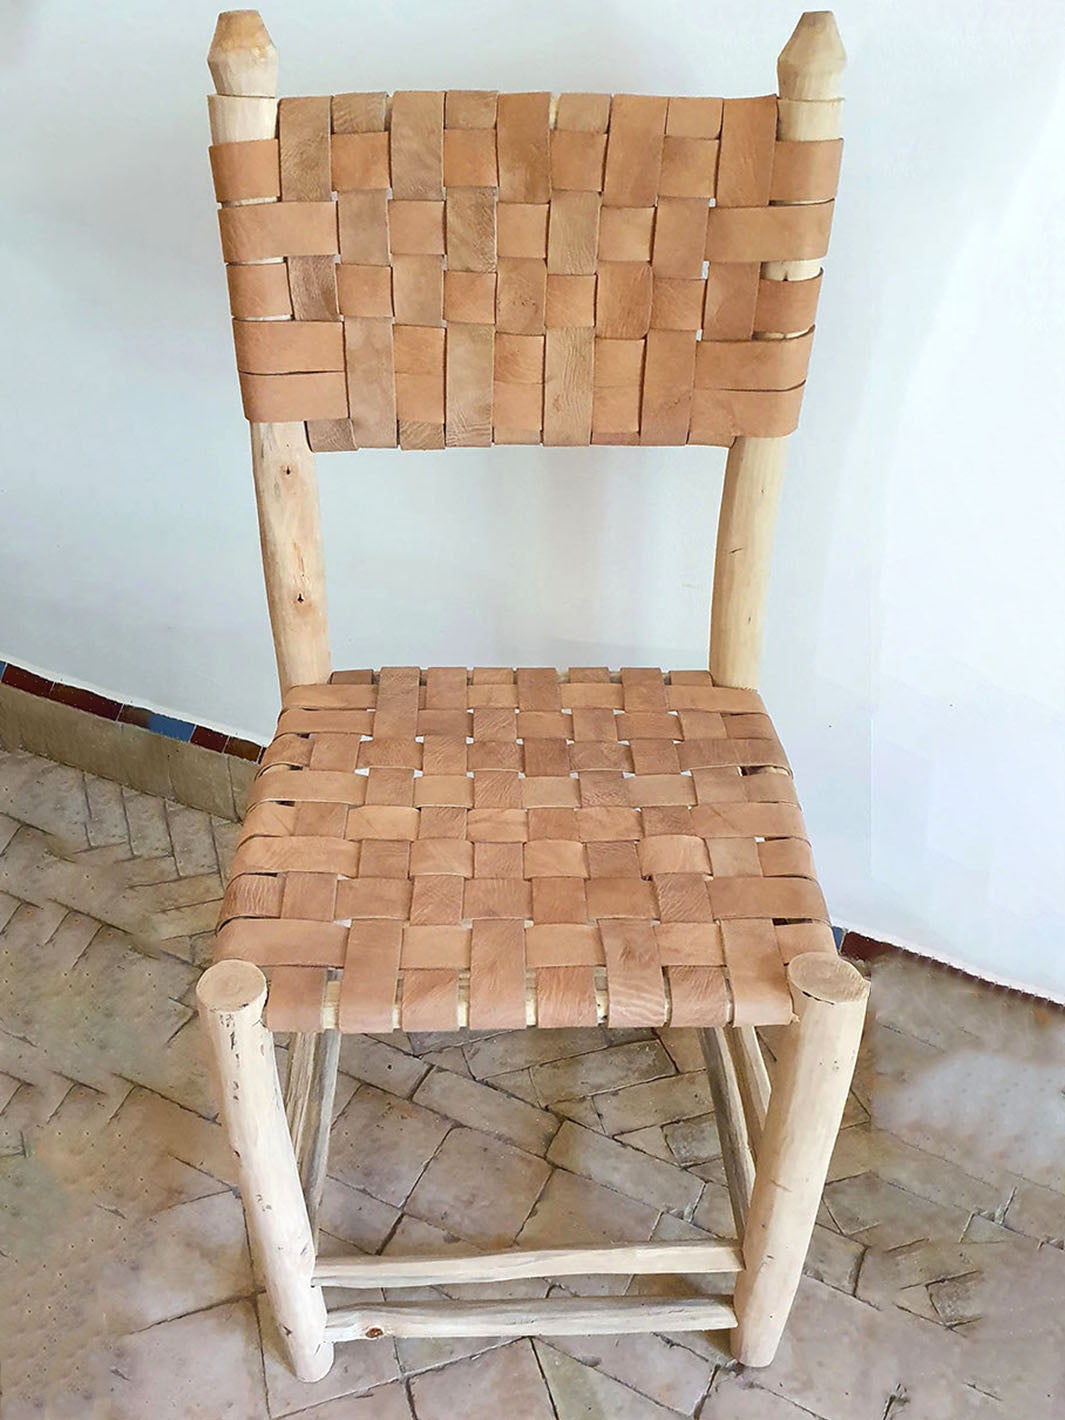 Handcrafted Artisanal Moroccan Laurel Wooden Chair Libitii Chairs LIB-0101-4